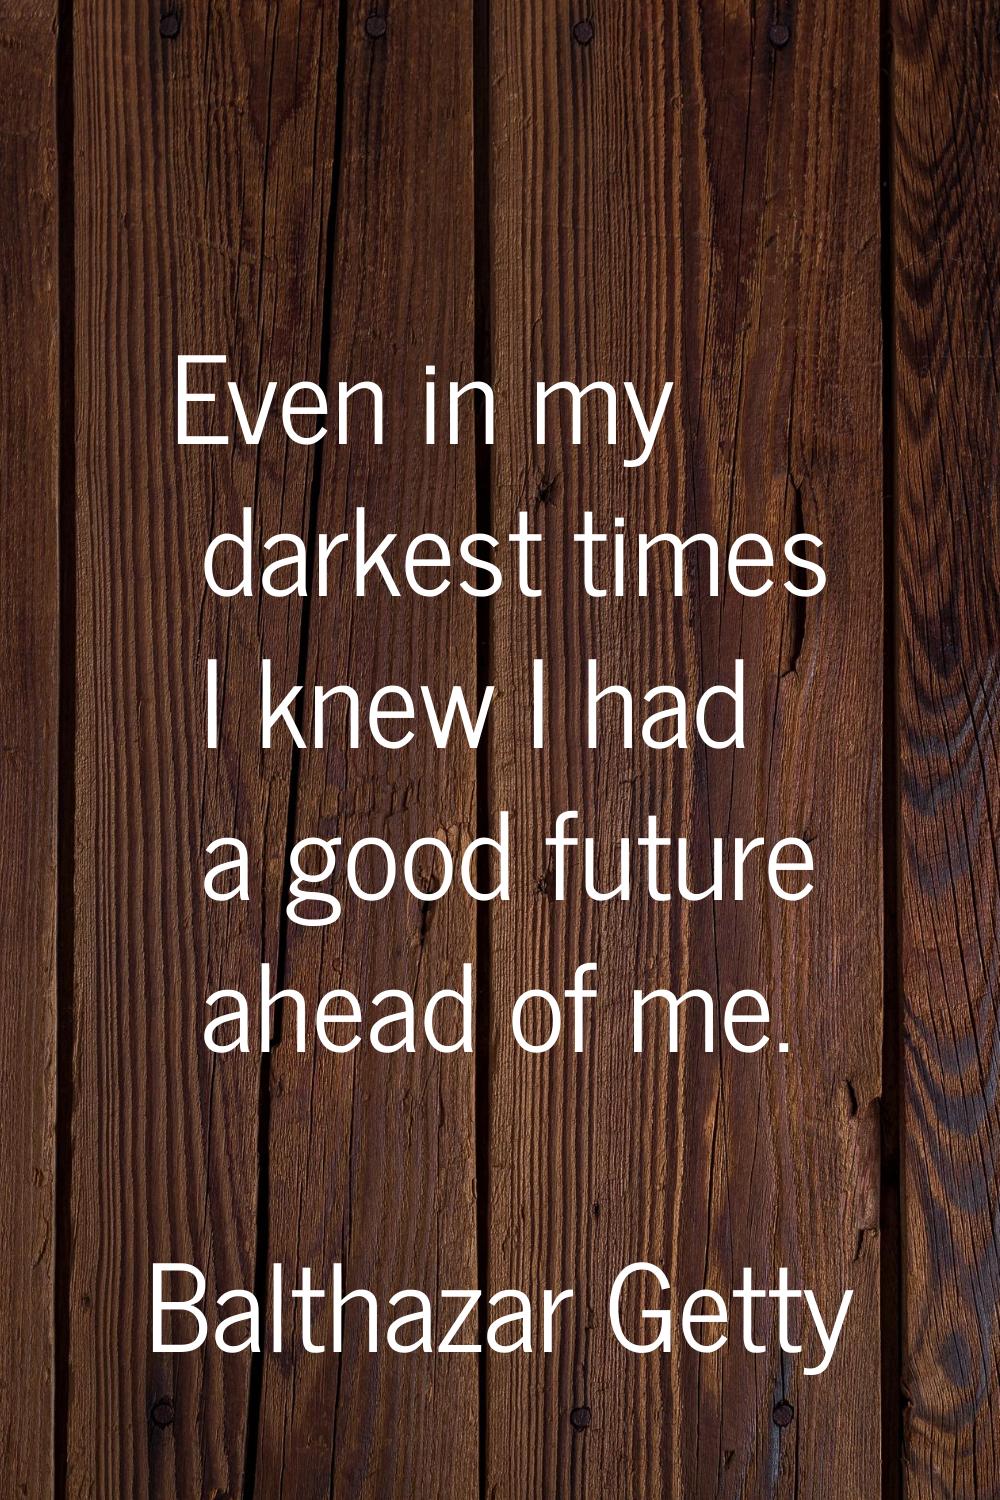 Even in my darkest times I knew I had a good future ahead of me.